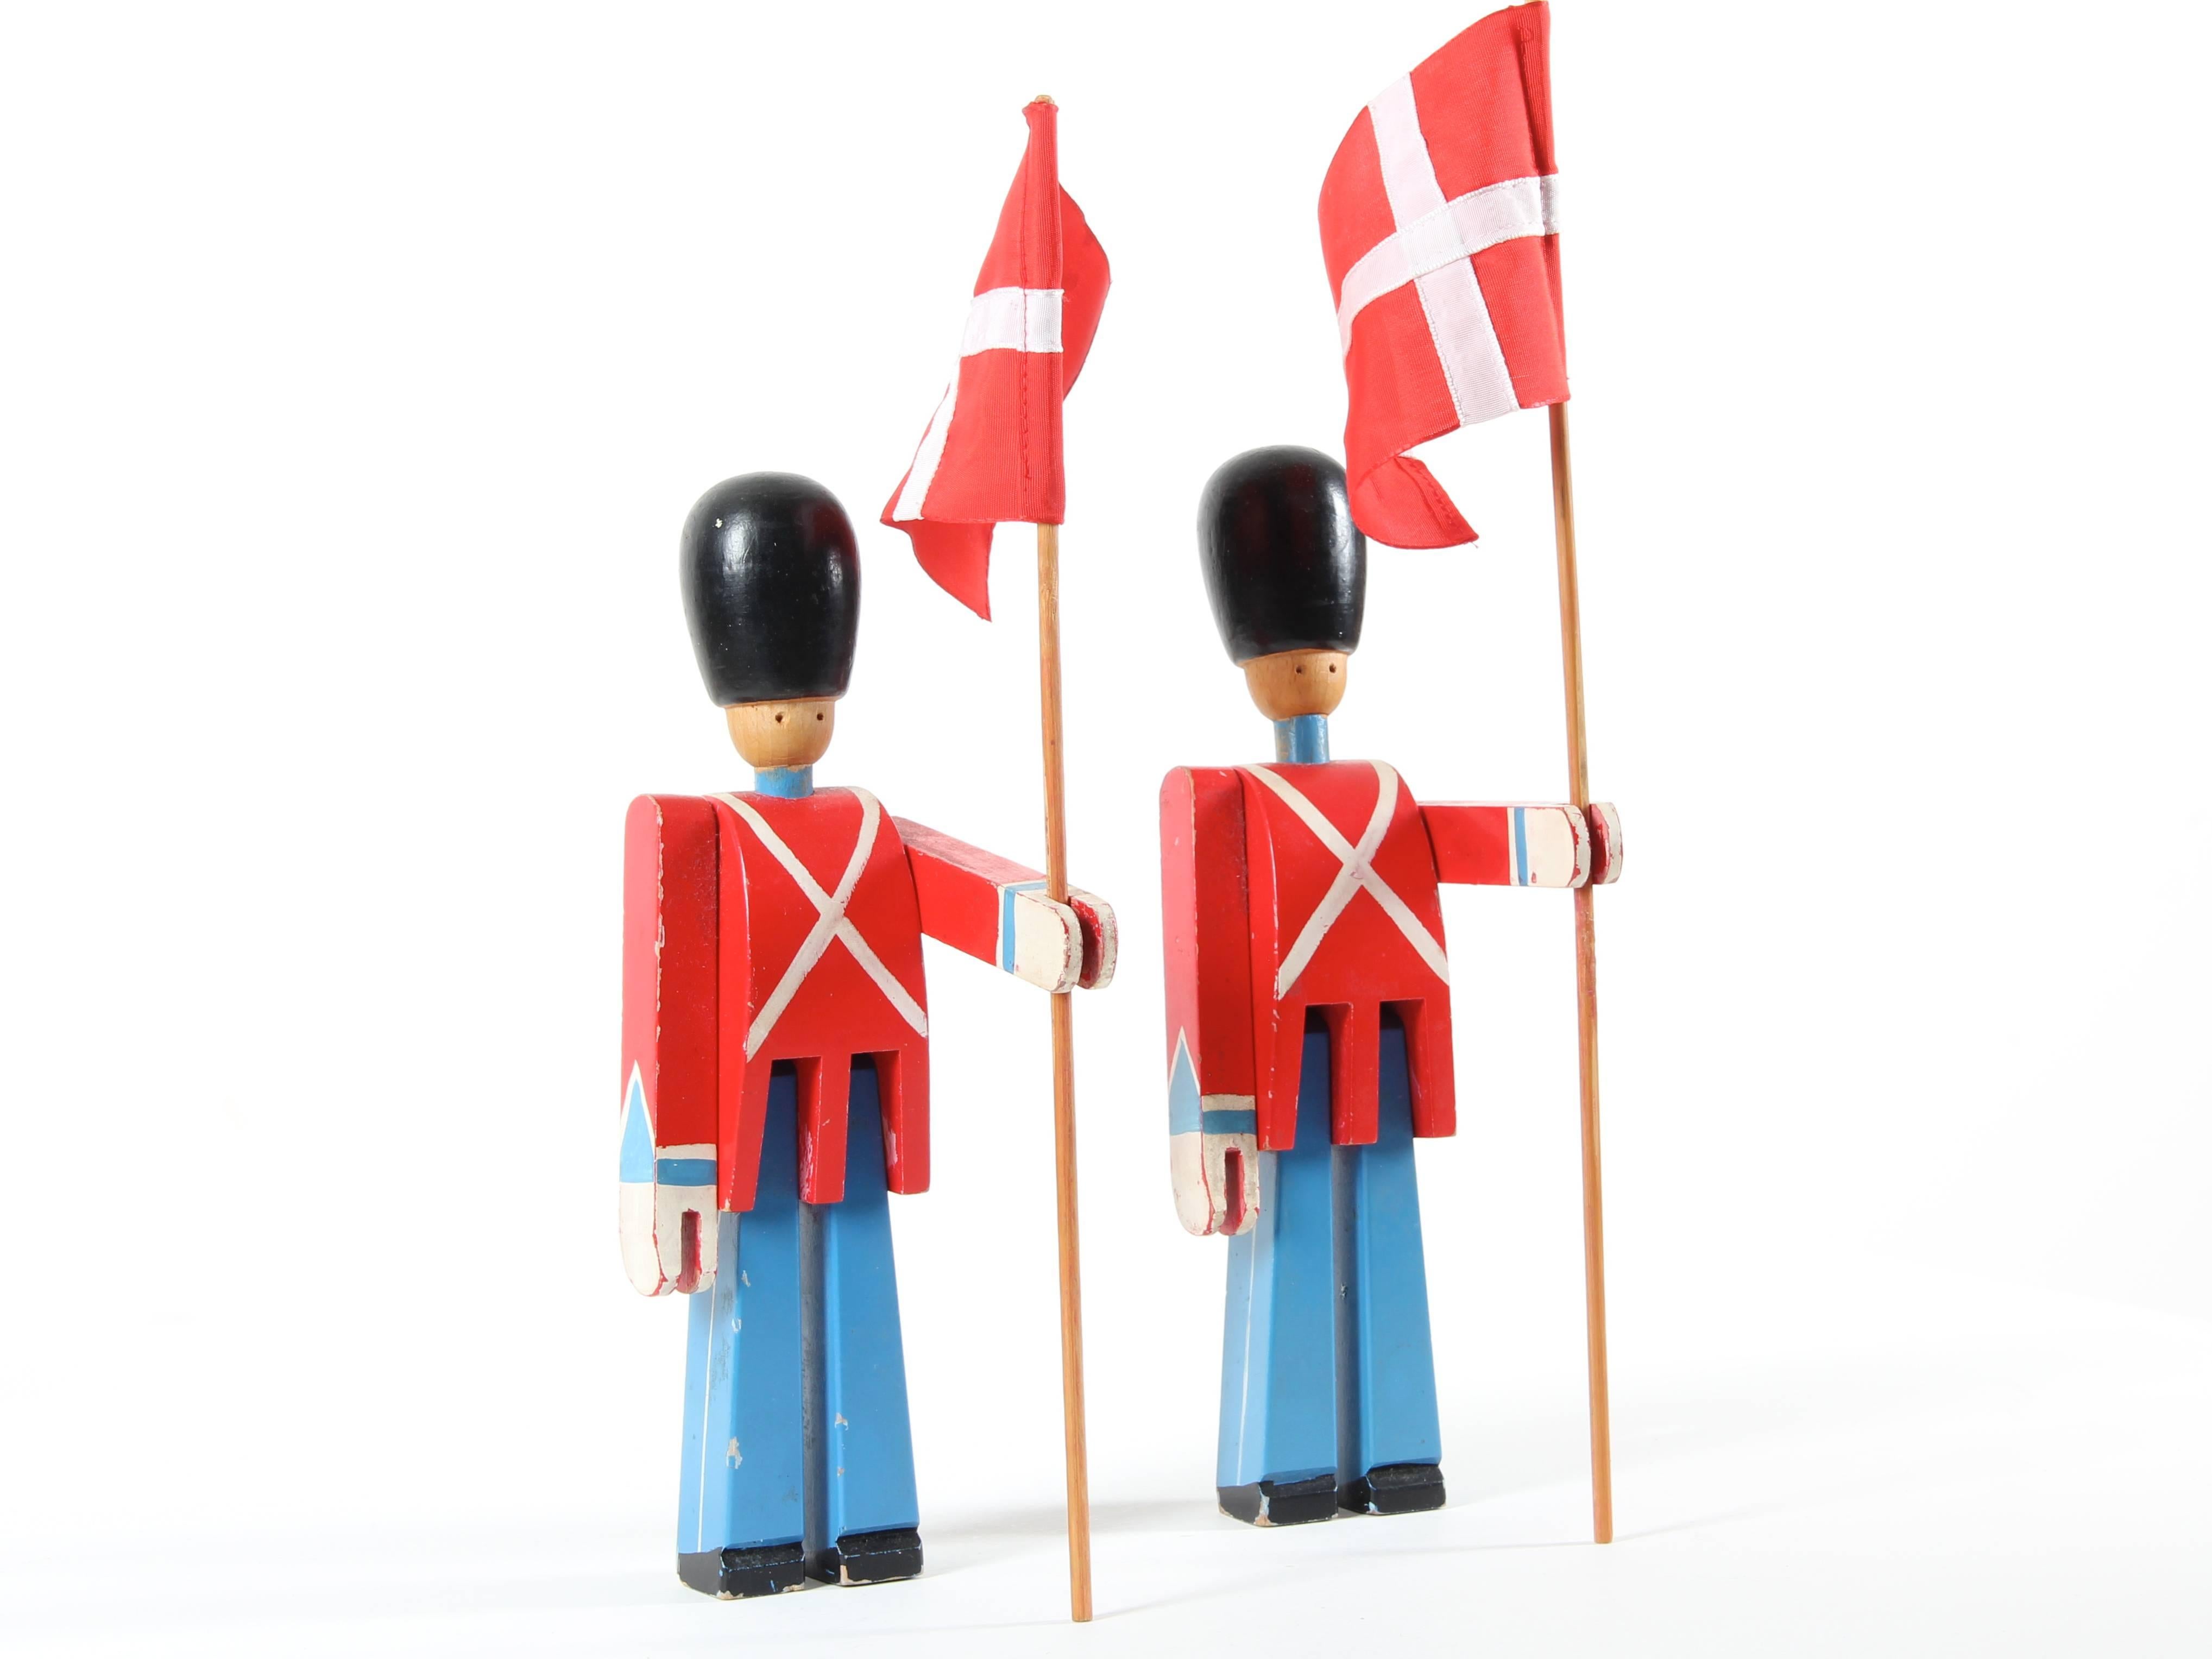 Guard Royal flagship, Danish Royal Guard with flag Kay Bojesen.

Kay Bojesen whose small shop is installed near the royal residence, sees passing everyday the Royal Guard. In 1940, after the entry into little Denmark, Bojesen created in support of